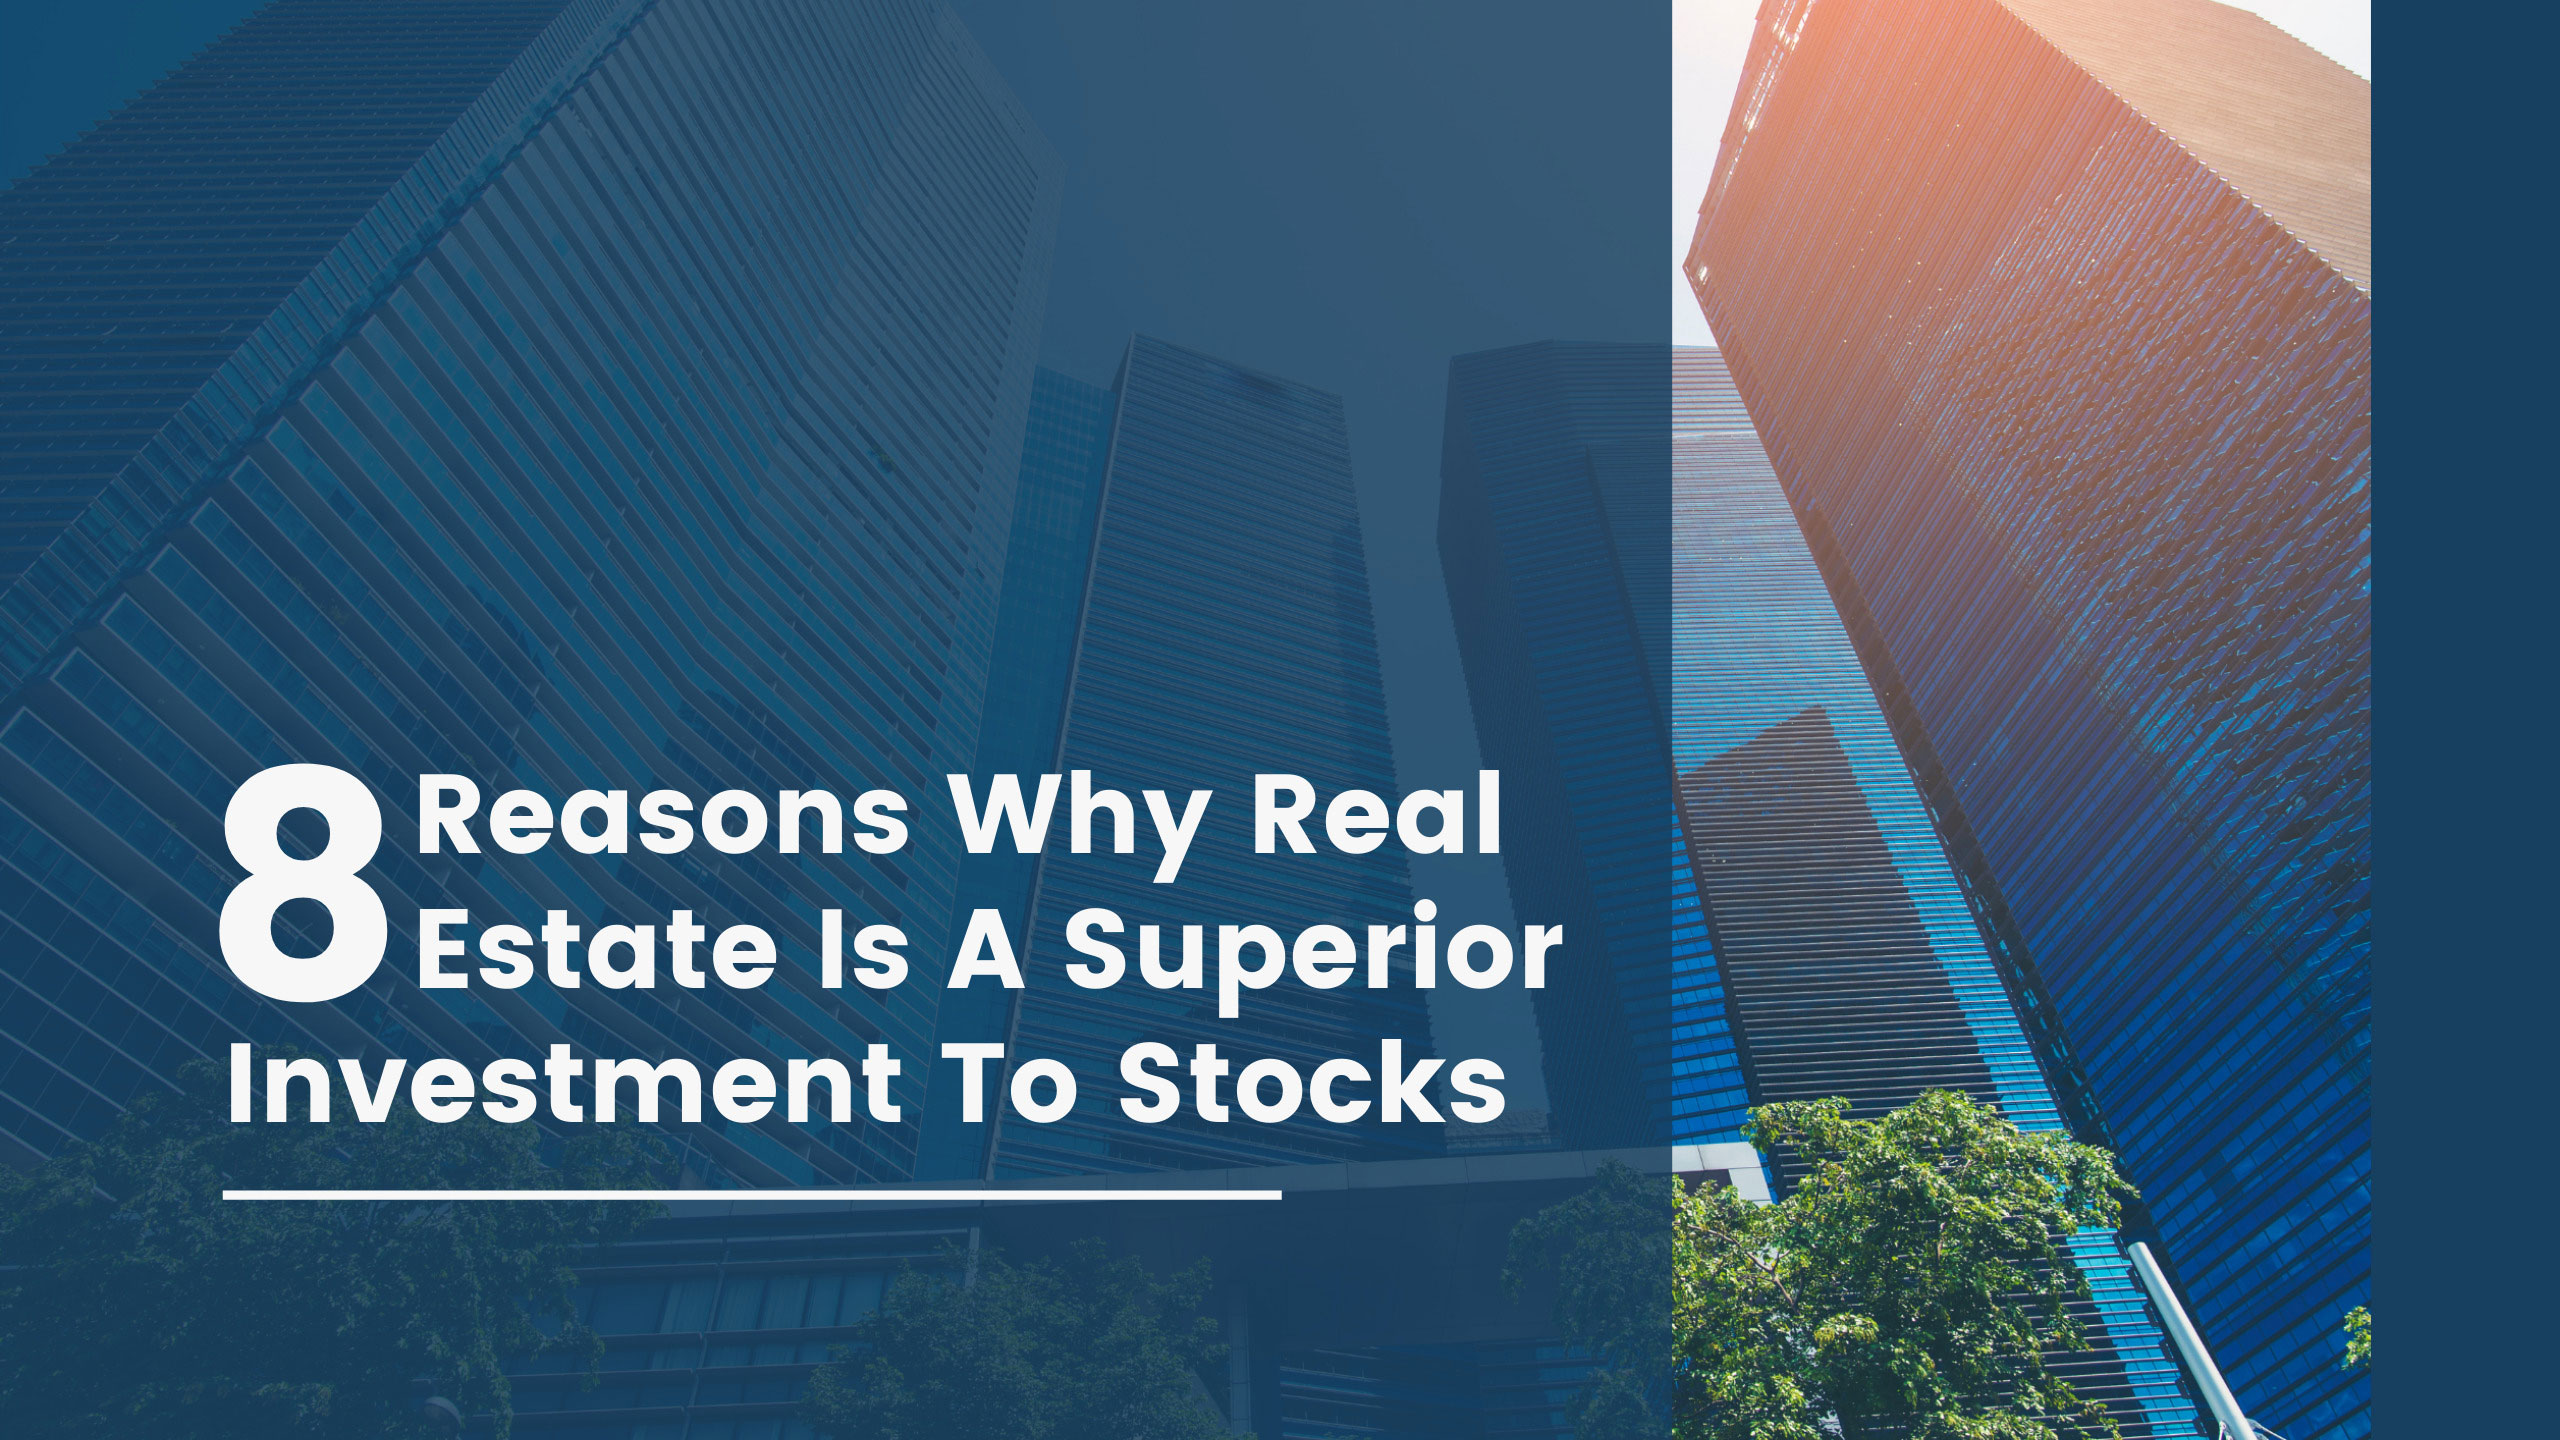 8-reasons-why-real-estate-is-a-superior-investment-to-stocks.jpg